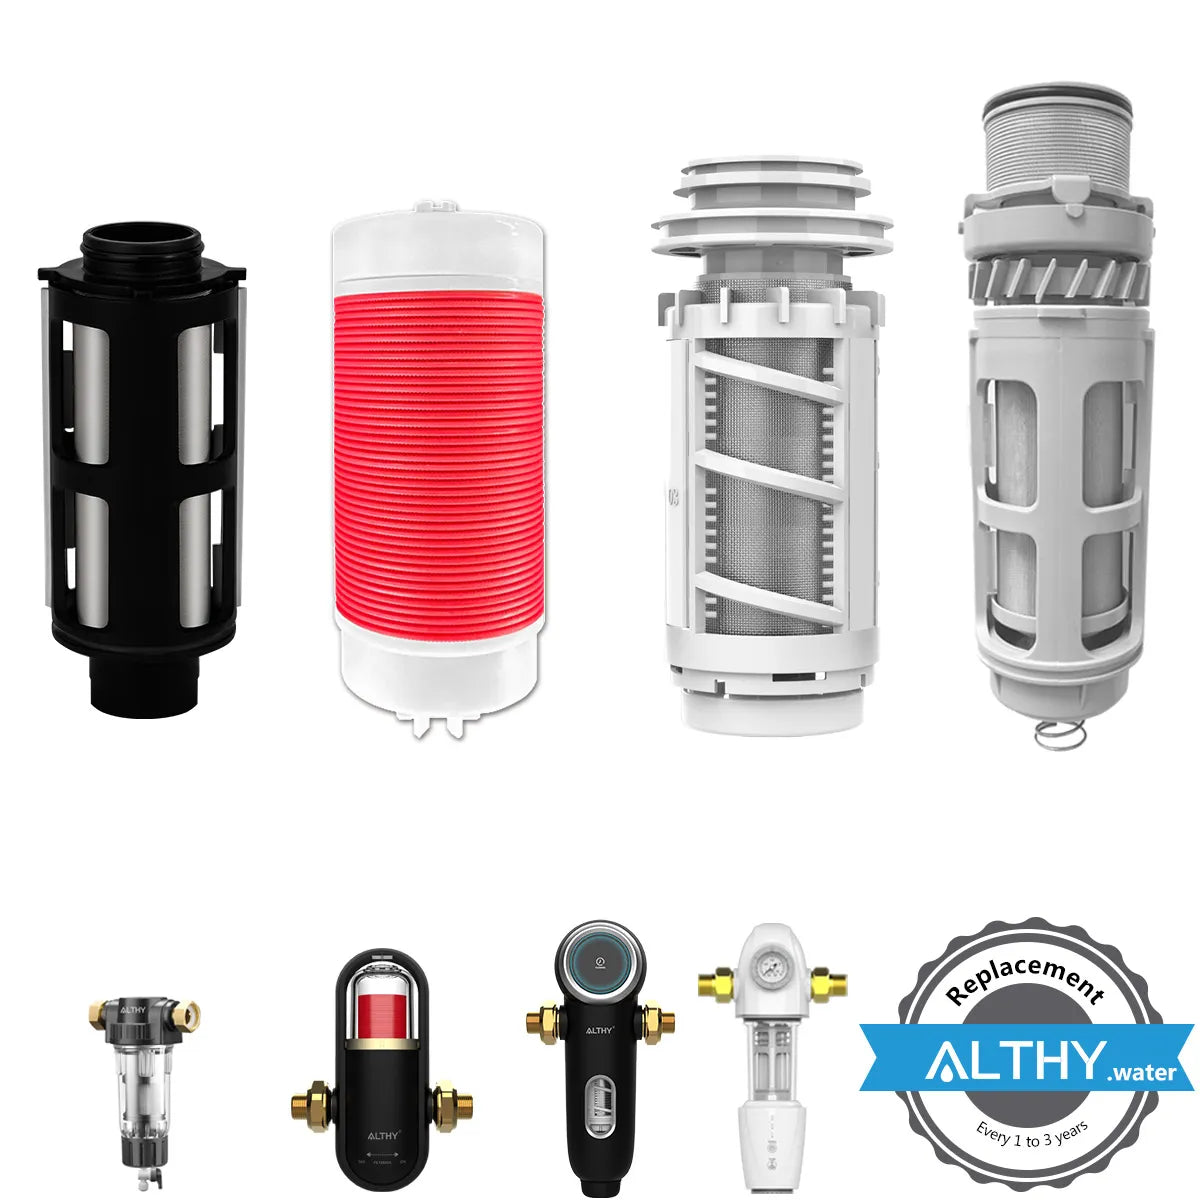 Backwash Water Filter Replacement For ALTHY PRE1 / PRE2 / PRE3 / PRE4 / AUTO2 Central Prefilter System Stainless Steel Mesh